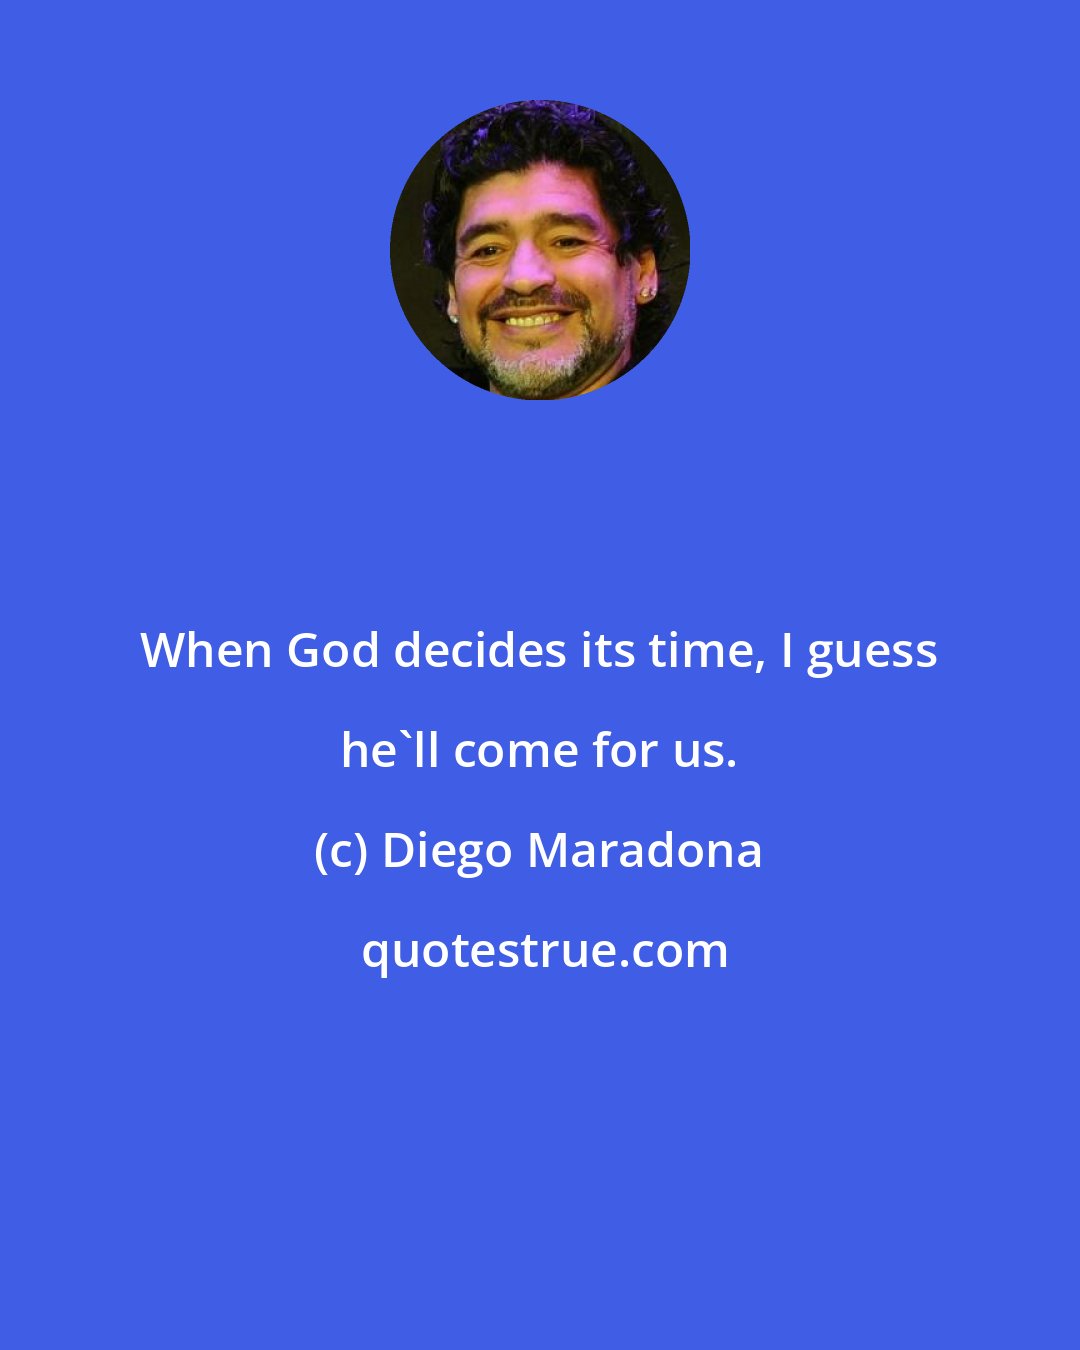 Diego Maradona: When God decides its time, I guess he'll come for us.